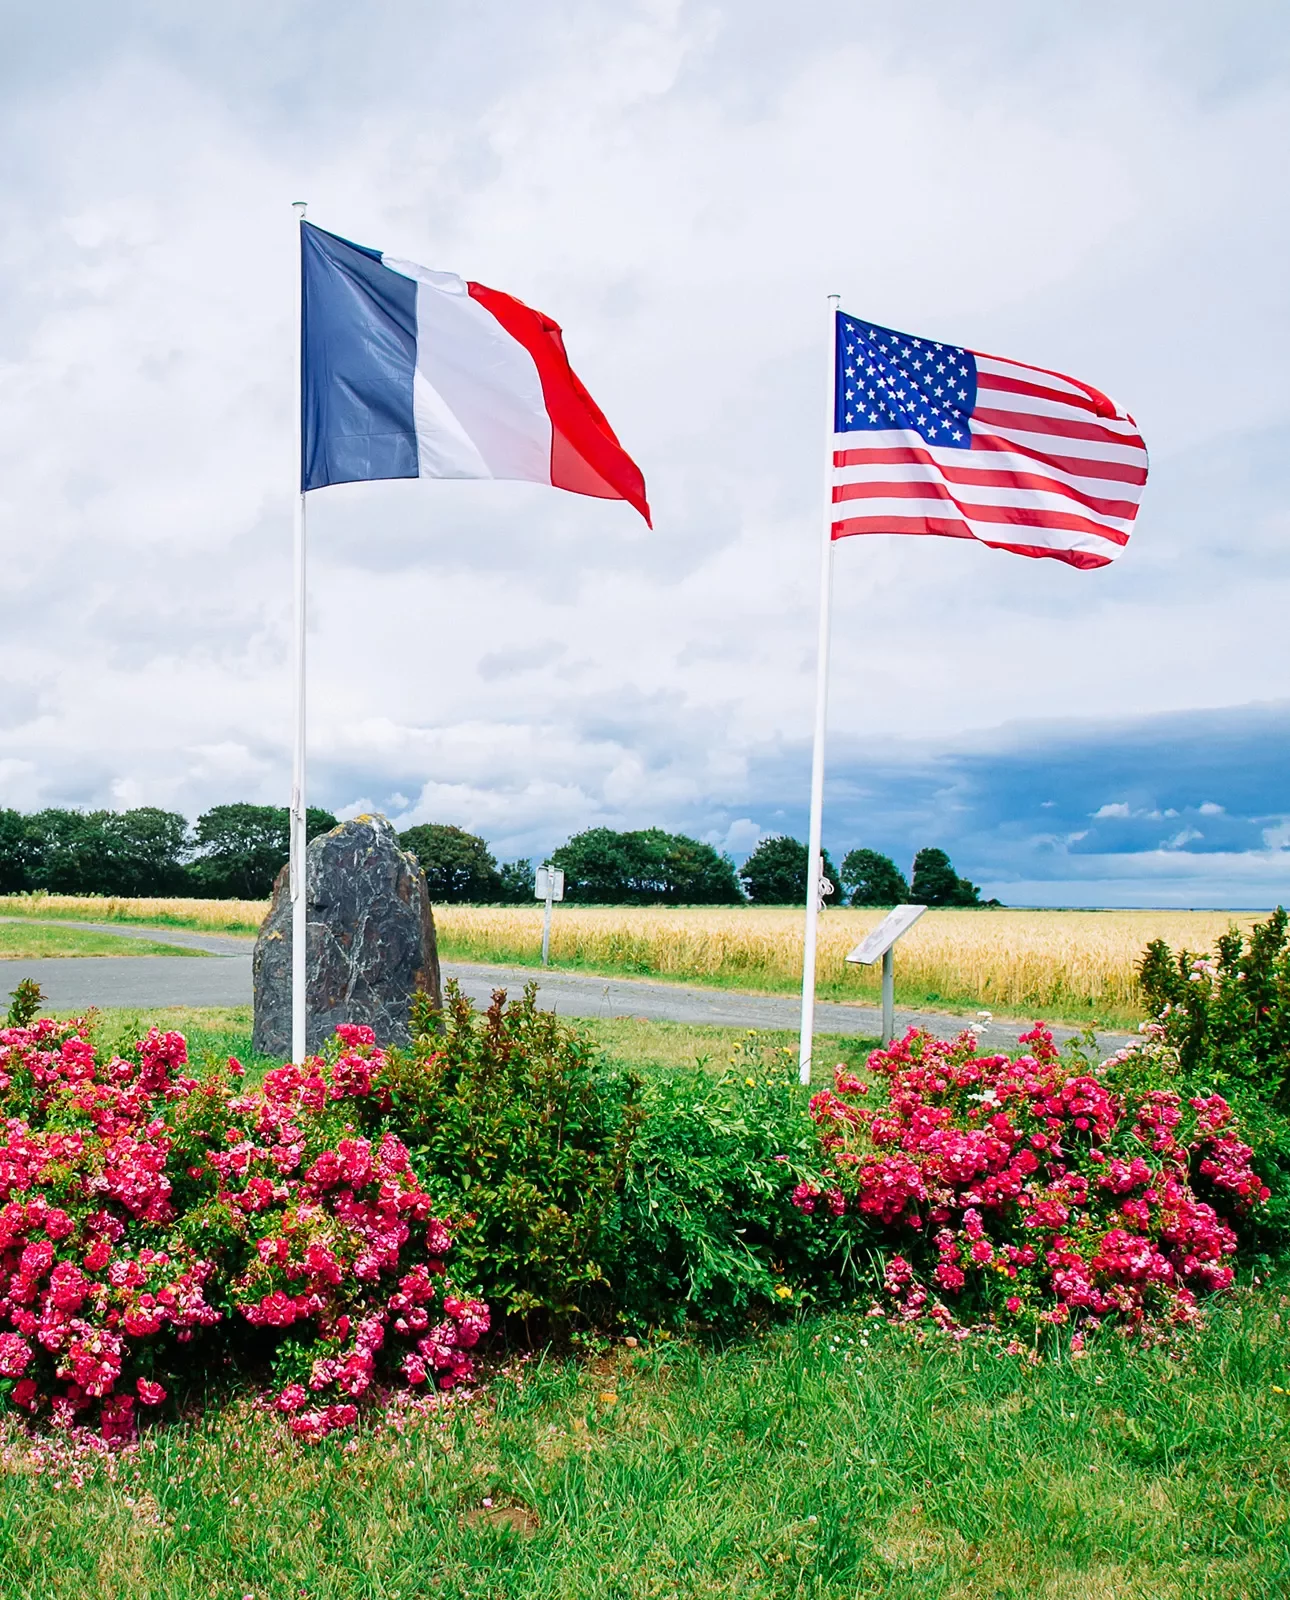 Flag of France and Flag of U.S.